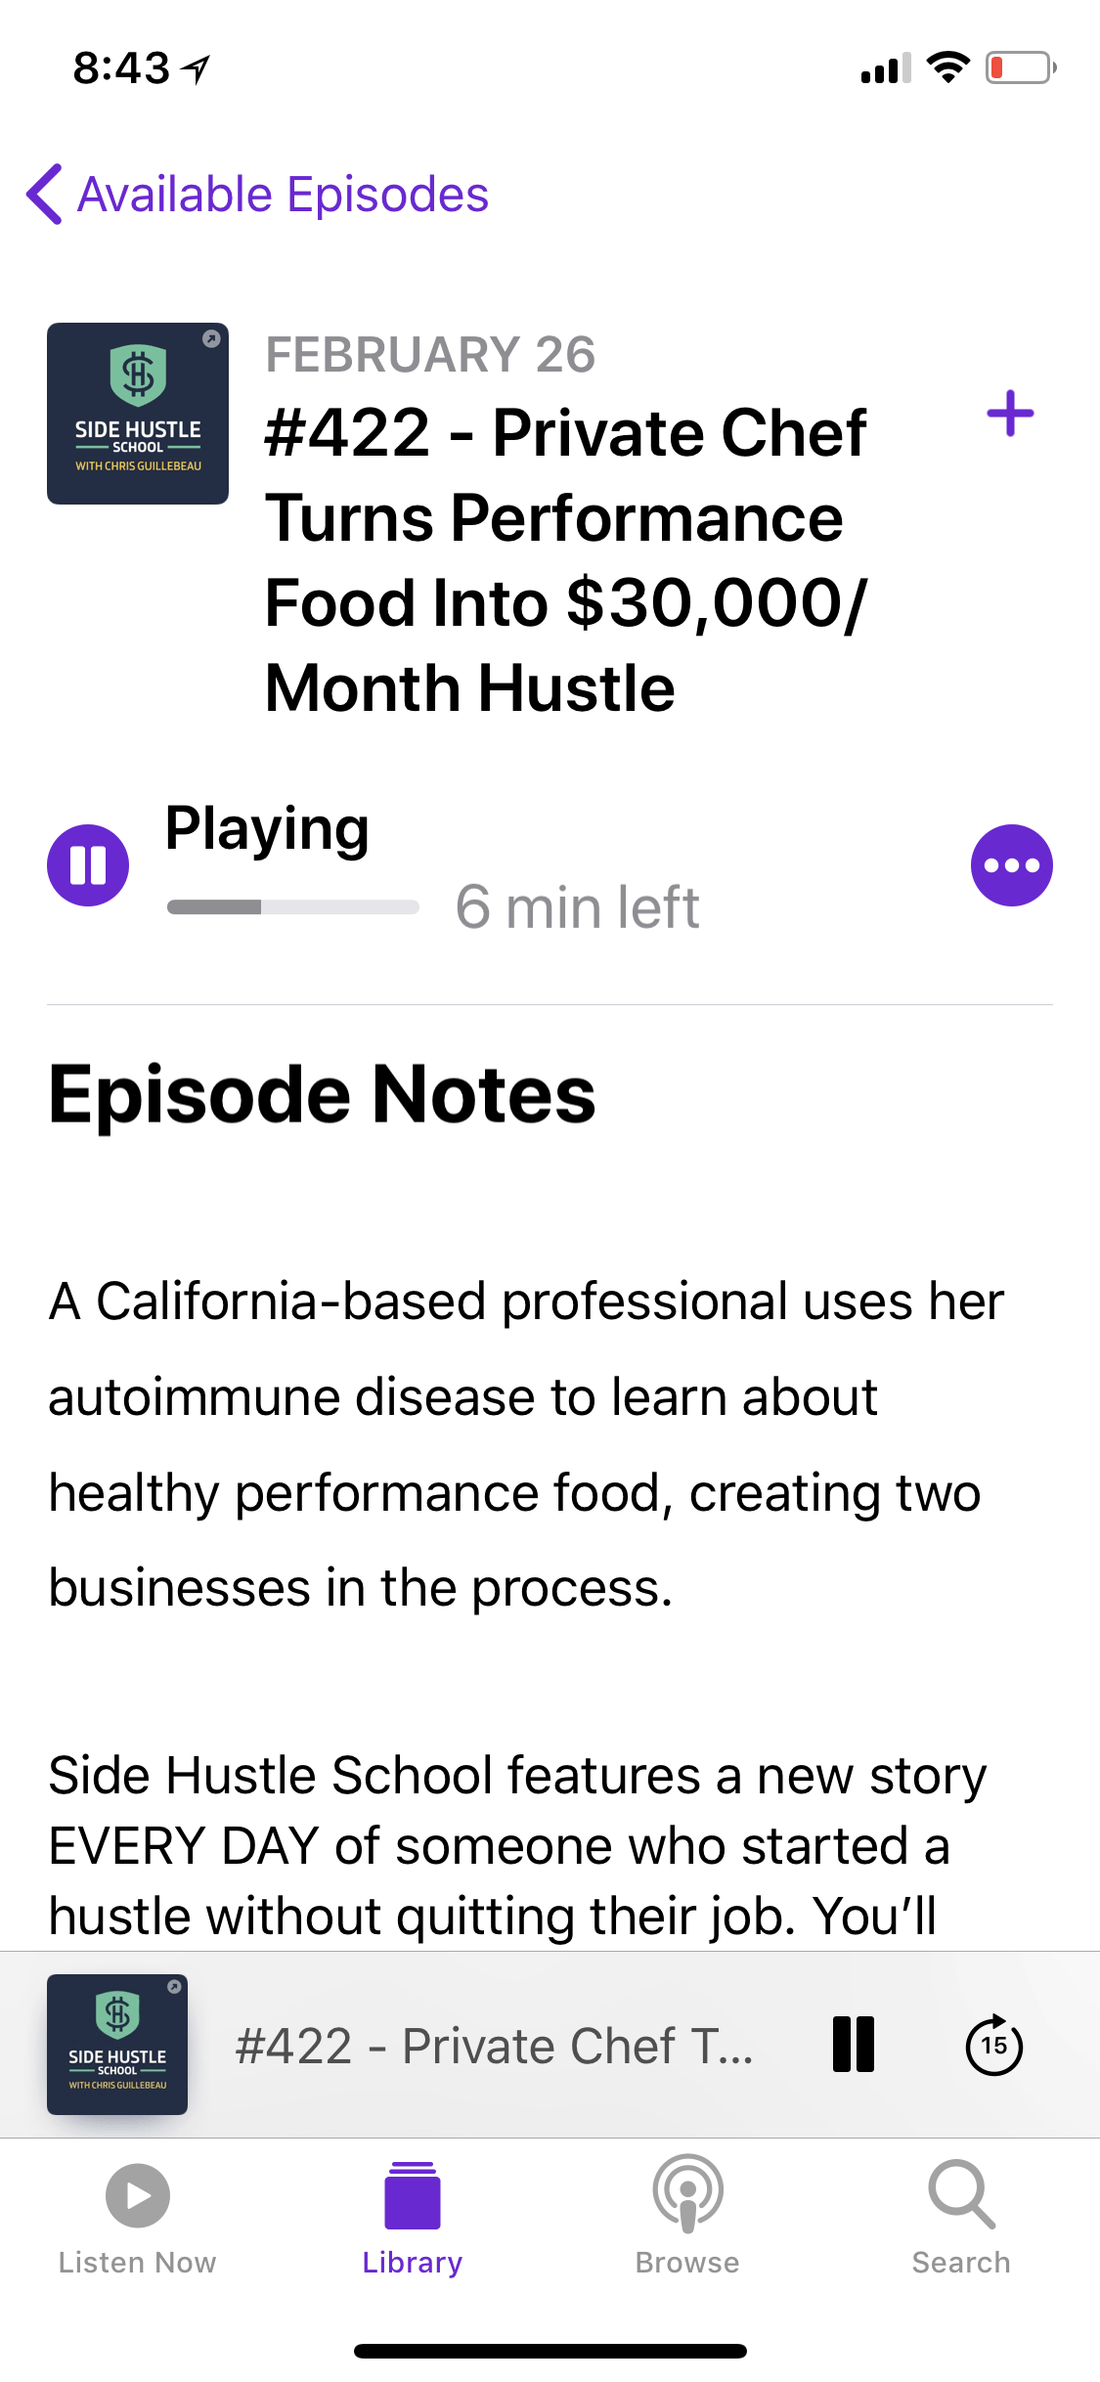 The Episode on Side Hustle School: #422 - Private Chef Turns Performance Food Into $30,000/Month Hustle